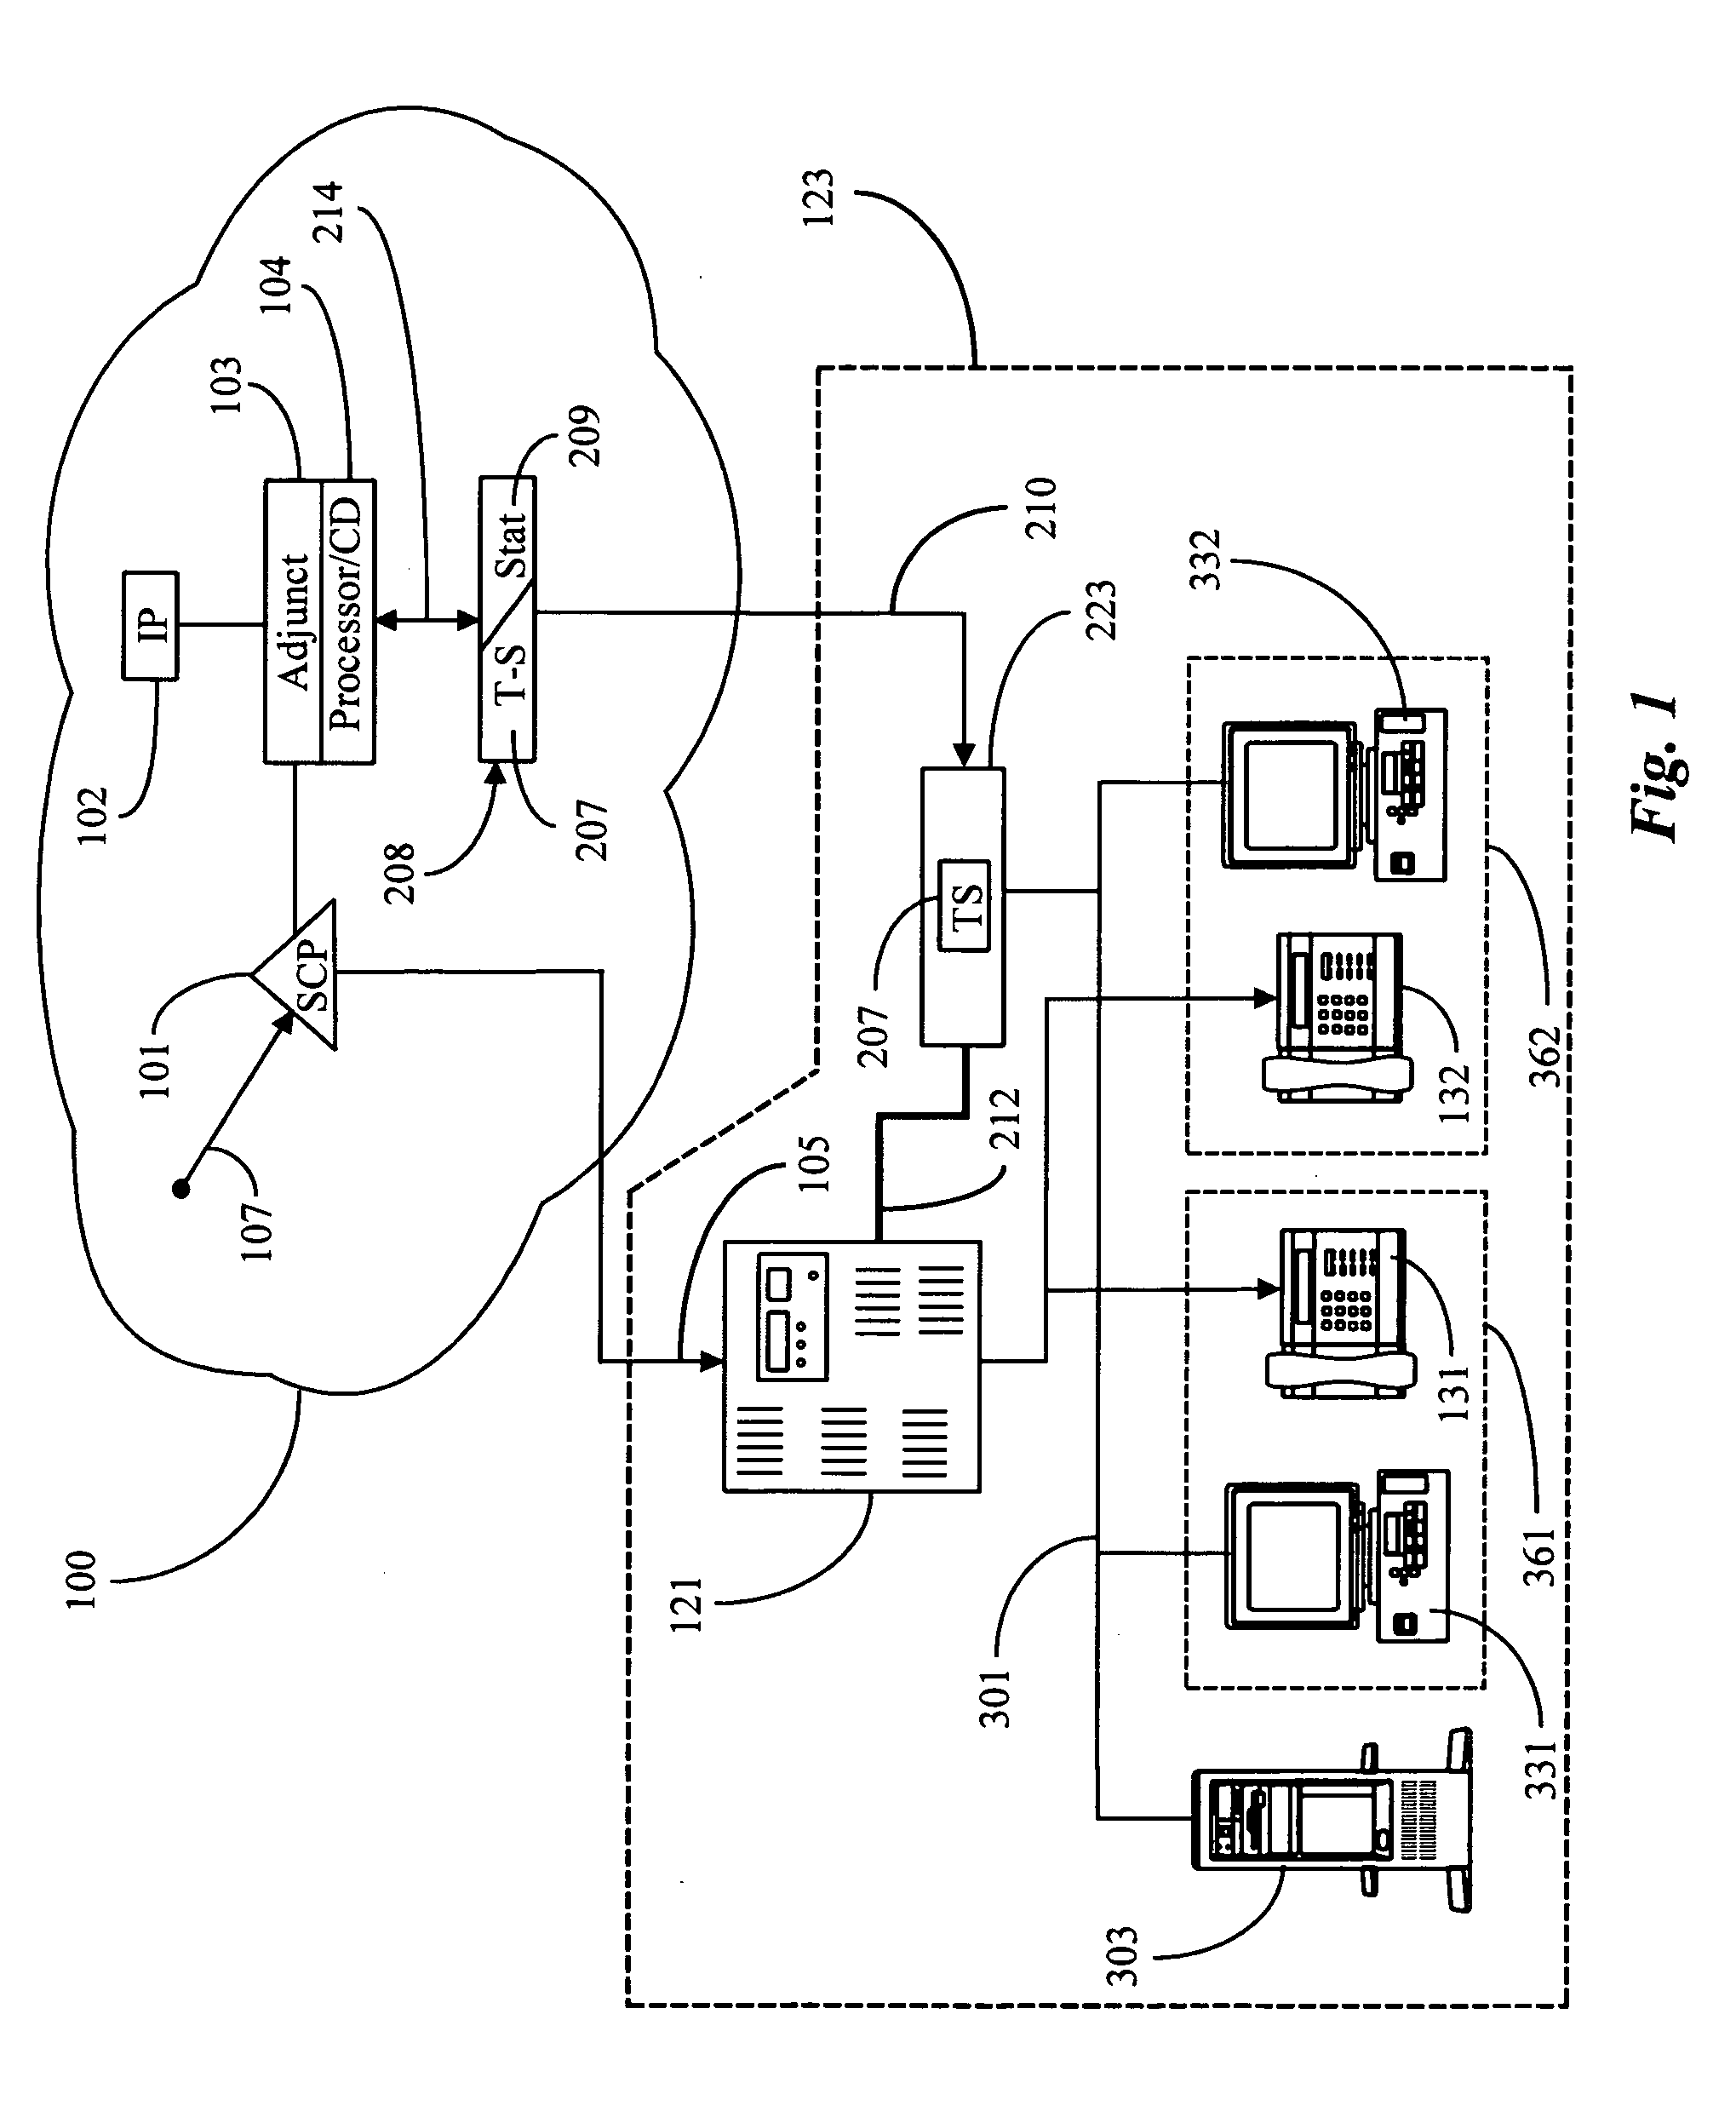 Call center apparatus and functionality in telephony